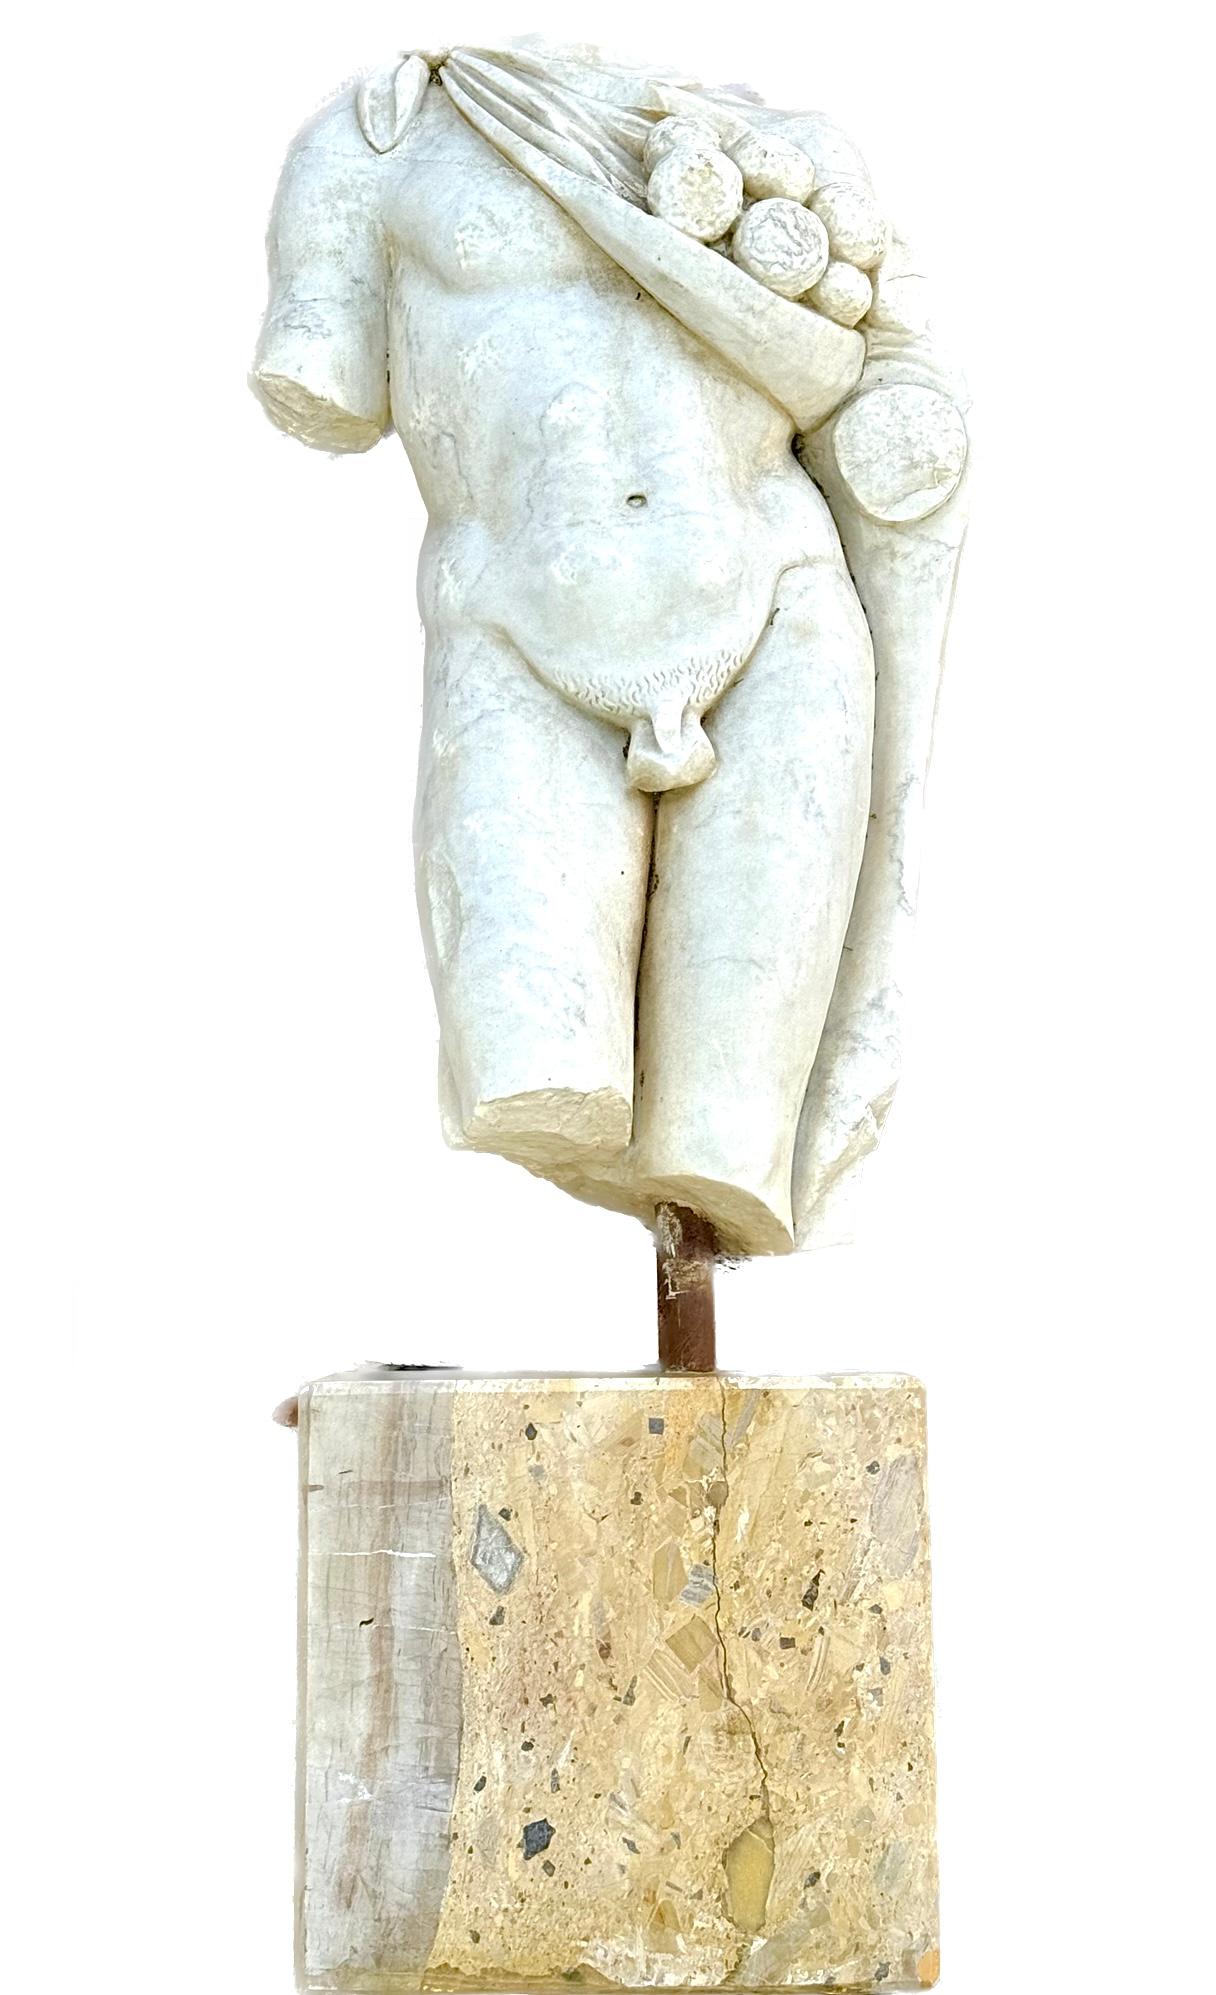 Antique Roman style marble Sculpture of draped Roman Male Torso, Mounted.  Sculpture is carved in the round and rising on a later marble base. Dimensions of Roman figure only are 37